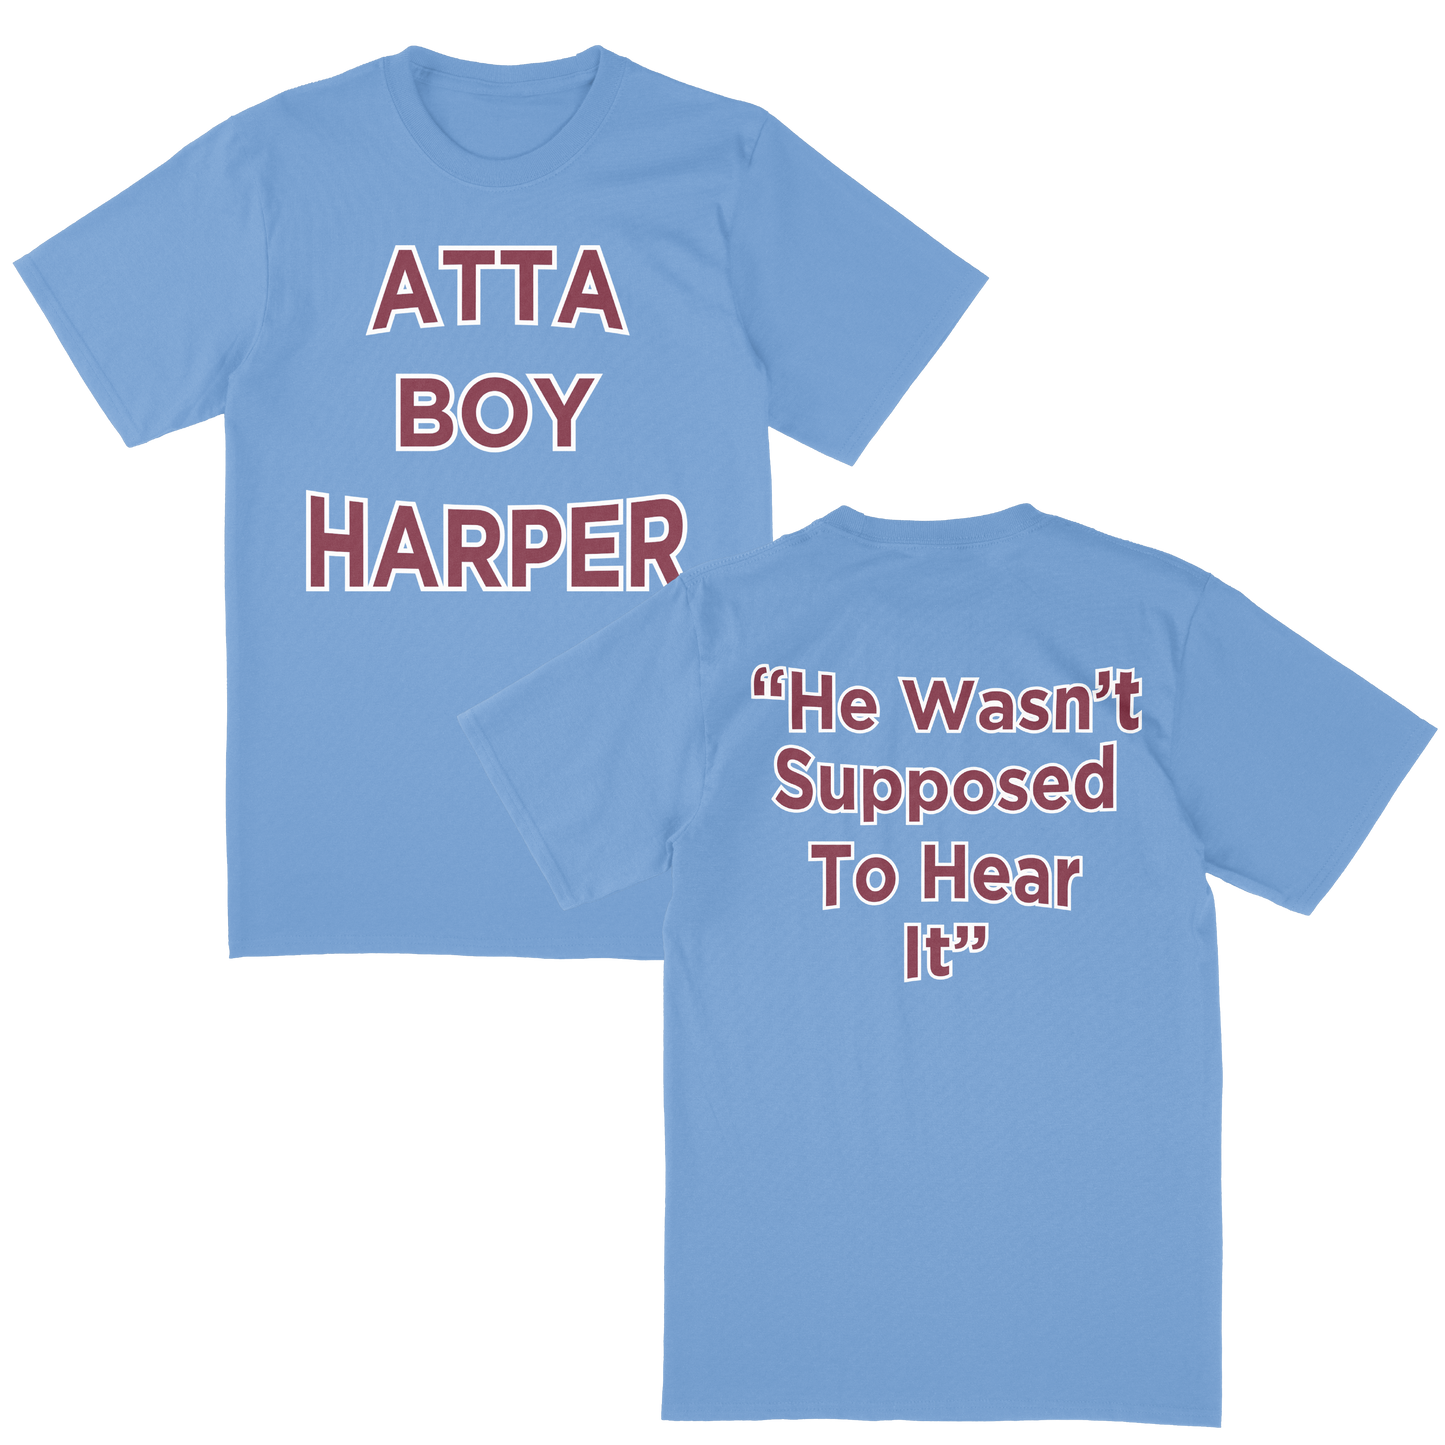 He Wasnt Supposed To Hear It - Harper - TShirt & More!